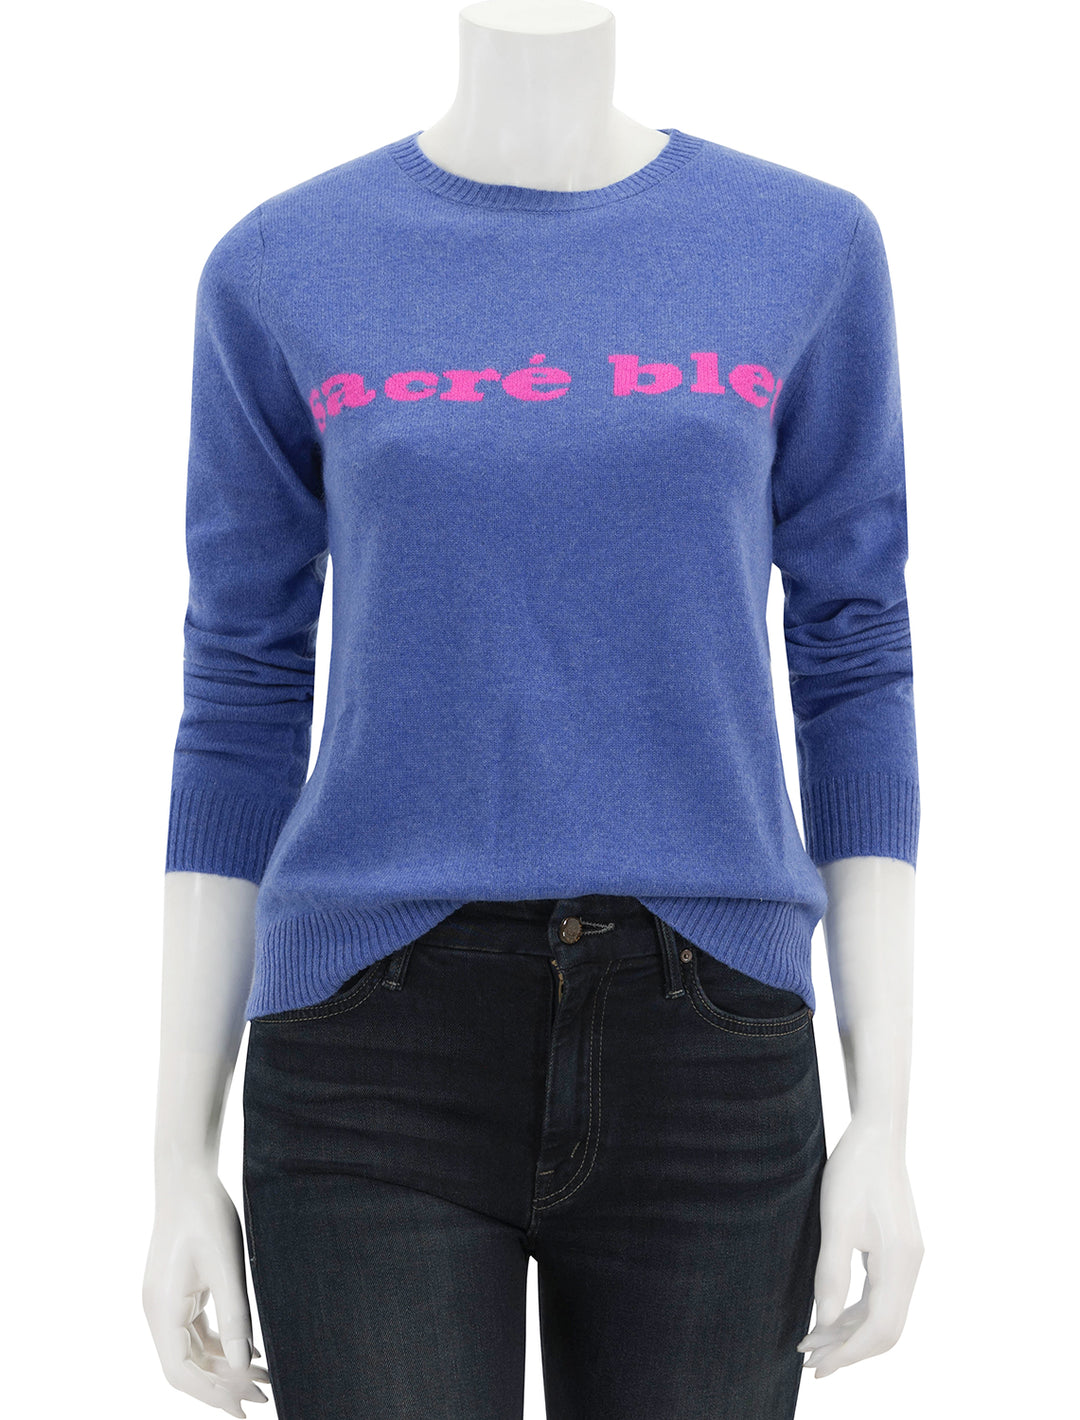 Front view of Jumper 1234's sacre bleu crew in periwinkle and hot pink.